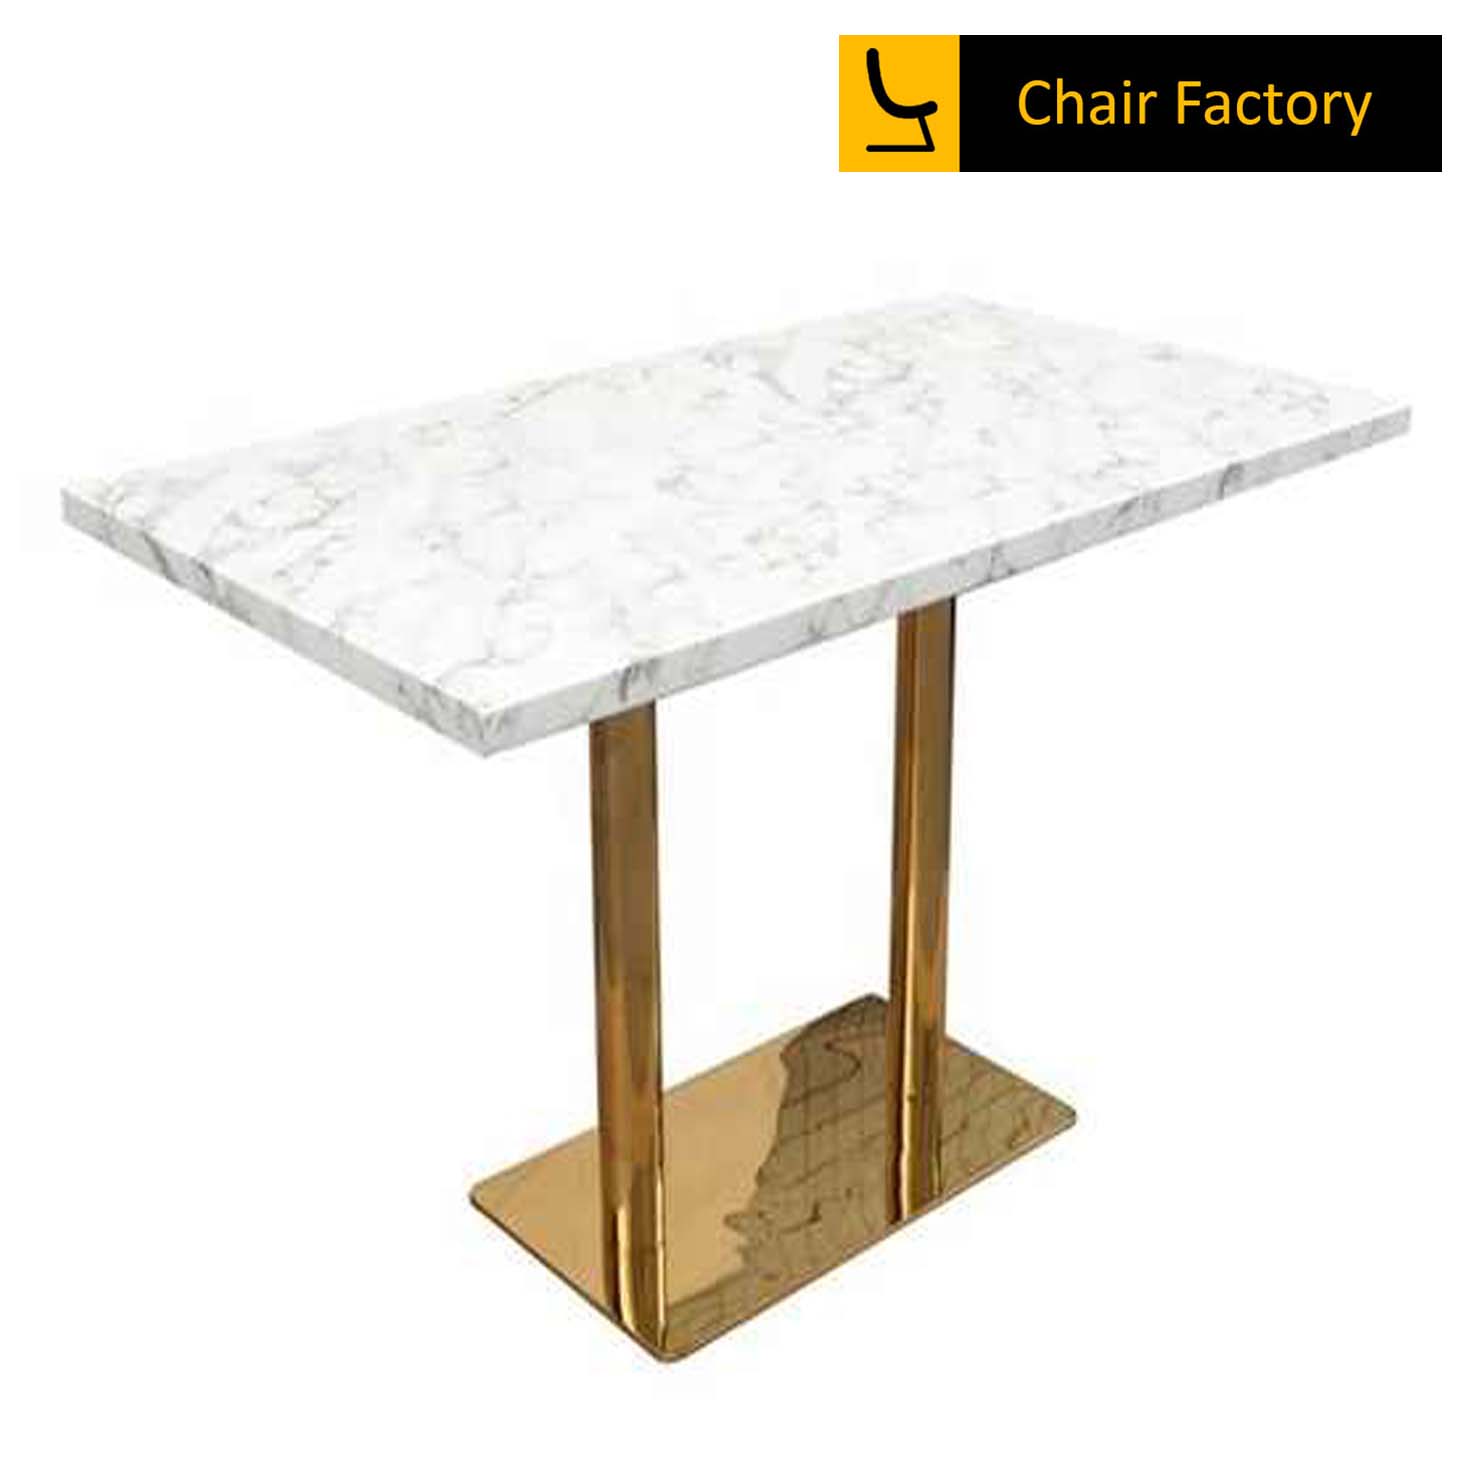 Supira white and Gold Rectangular Cafe Table